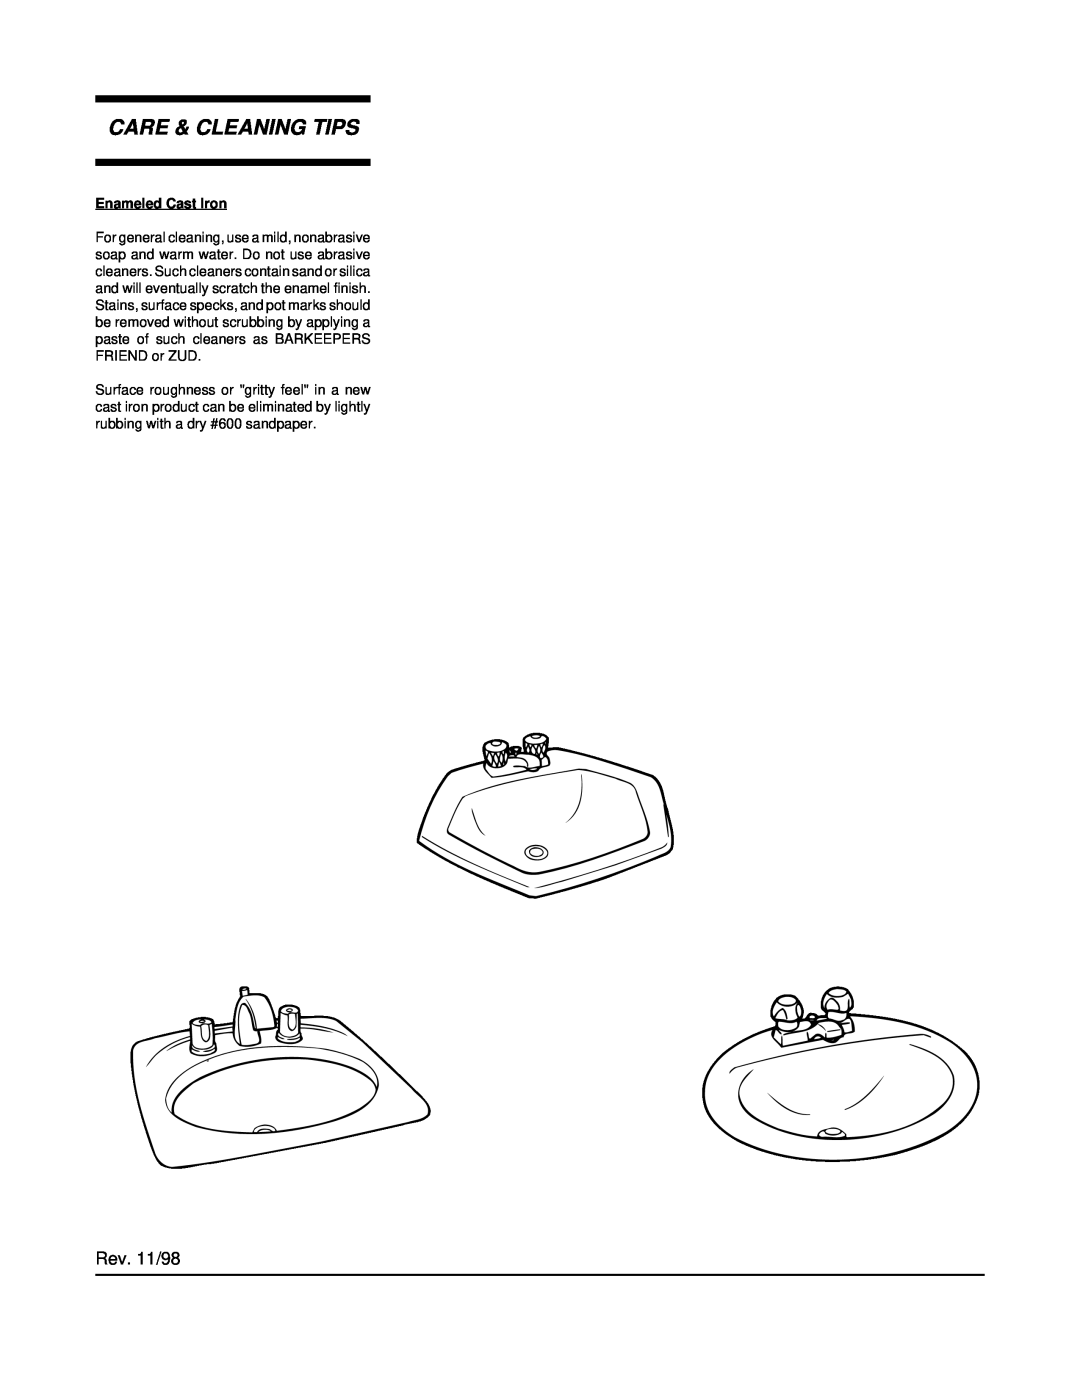 Jacuzzi Countertop Lavatories manual Care & Cleaning Tips, Rev. 11/98, Enameled Cast Iron 